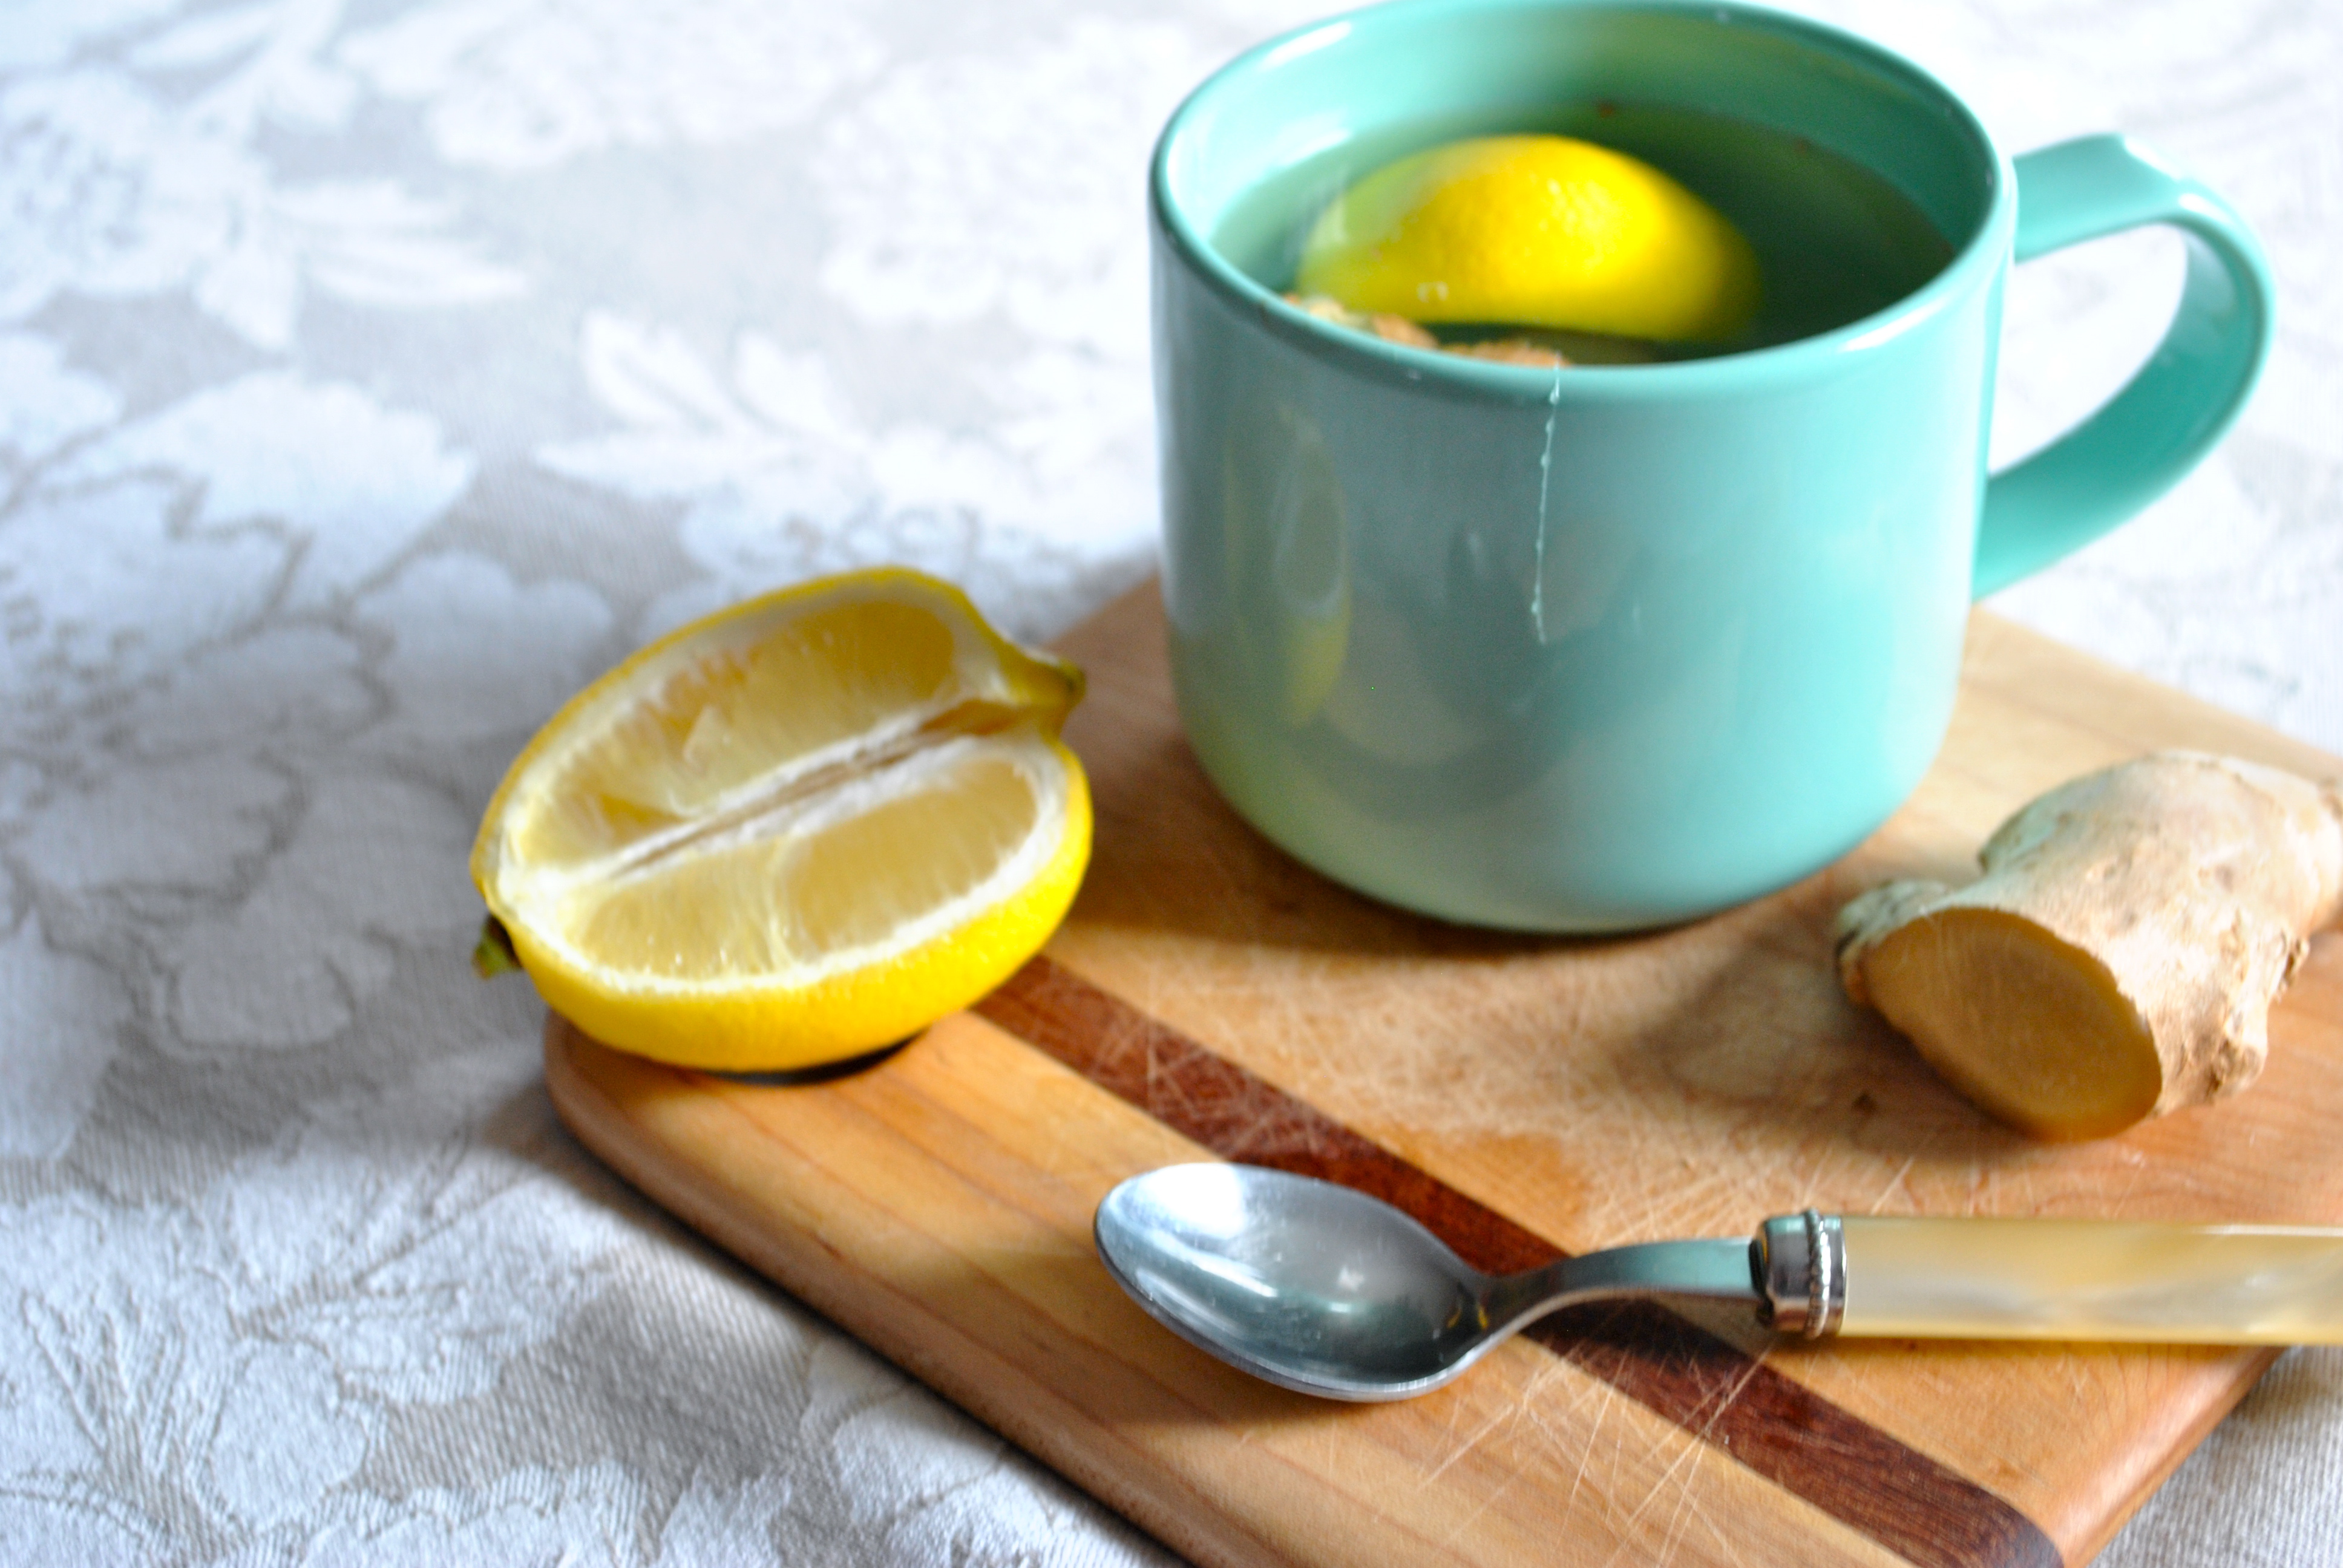 This Lemon Ginger Tea Recipe Will Detox And Transform Your Life!